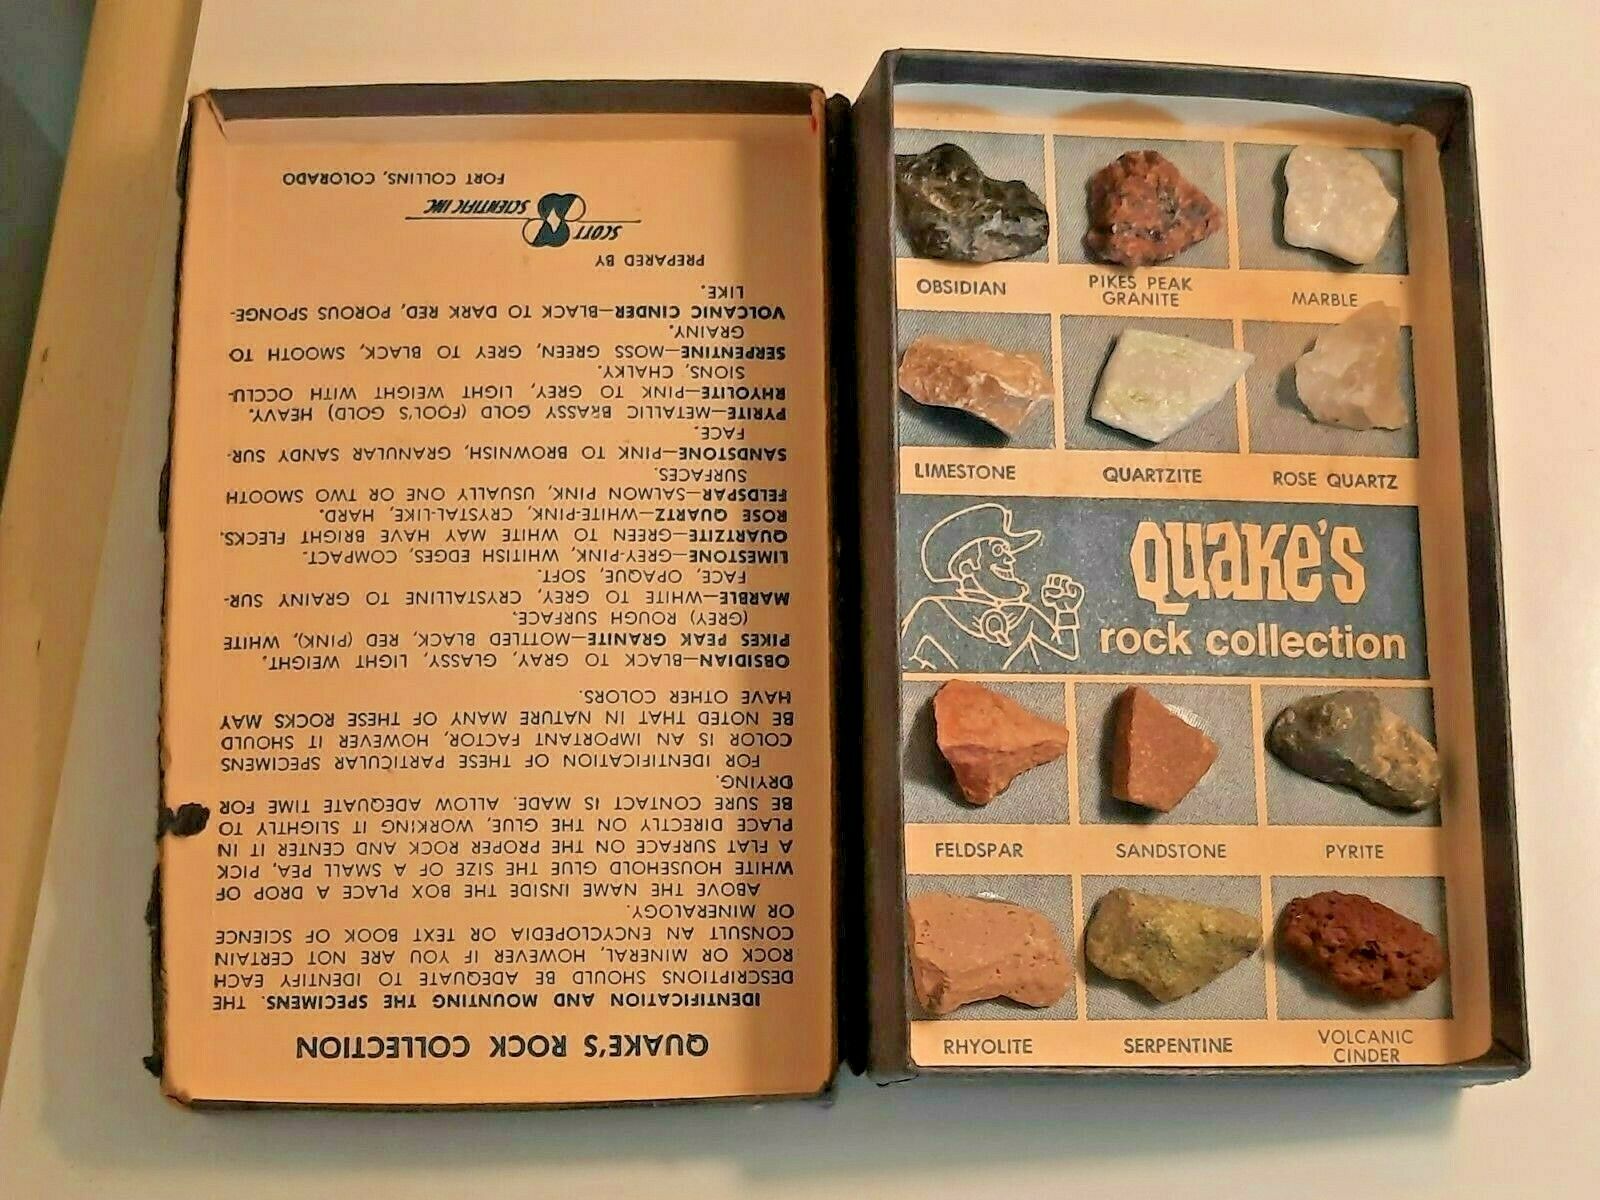 Vintage 1960's Quake's Rock Collection - Mail-in Offer From Quaker Cereal